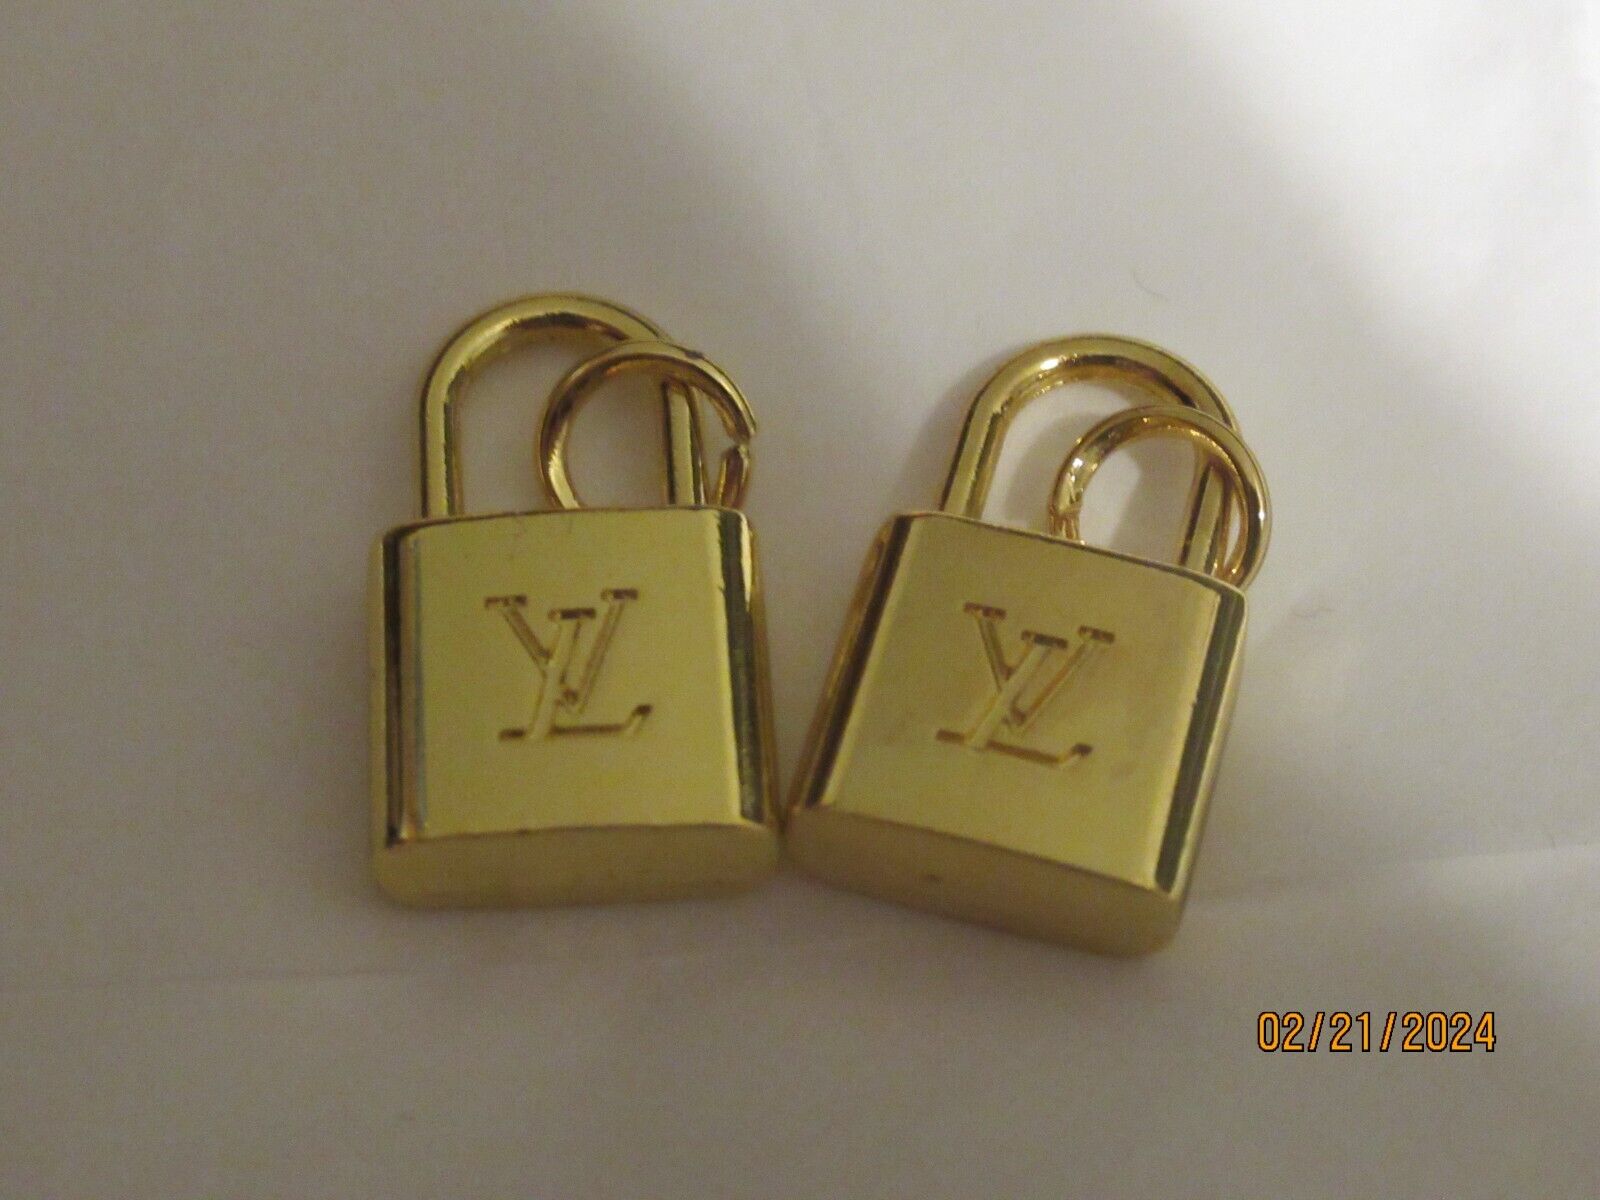 LV LOUIS VUITTON  2 ZIP PULL  CHARM 20X12MM VIVID gold, tone, THIS IS FOR 2